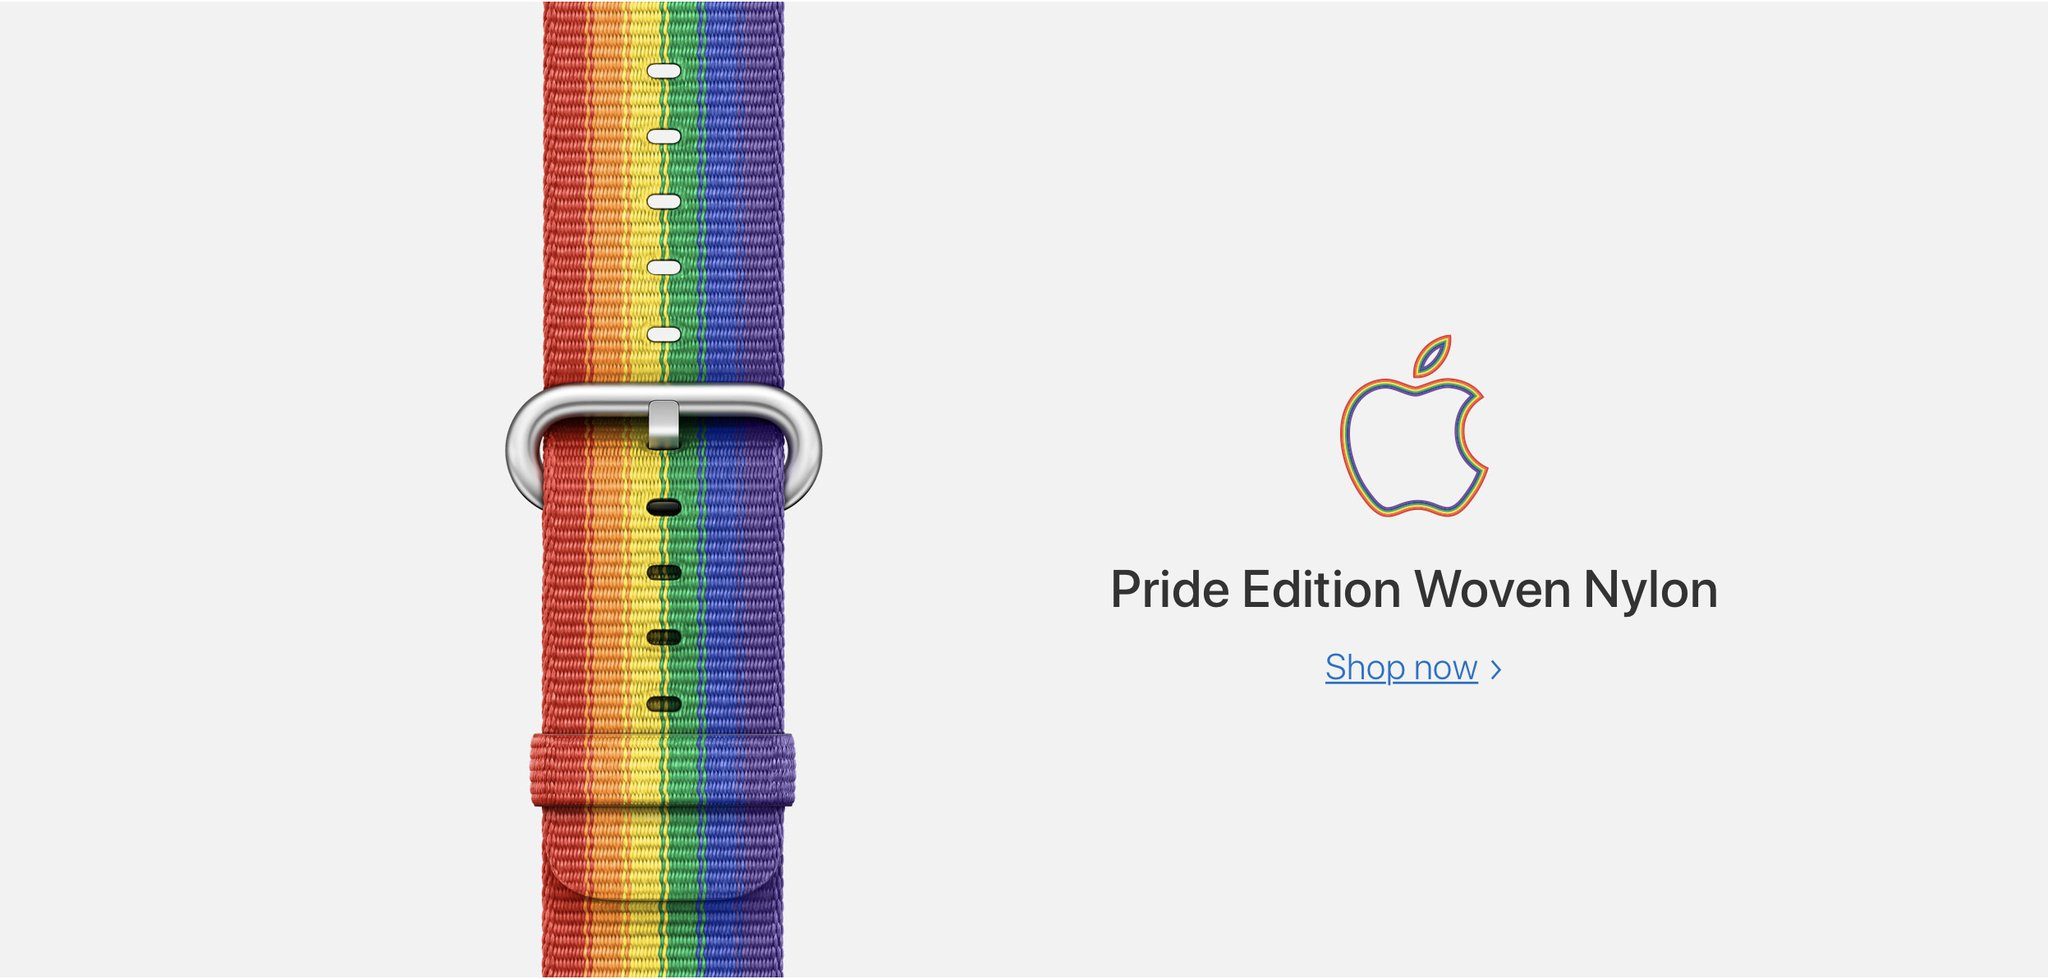 iOS 11.3 Suggests New Pride Face Coming to Apple Watch